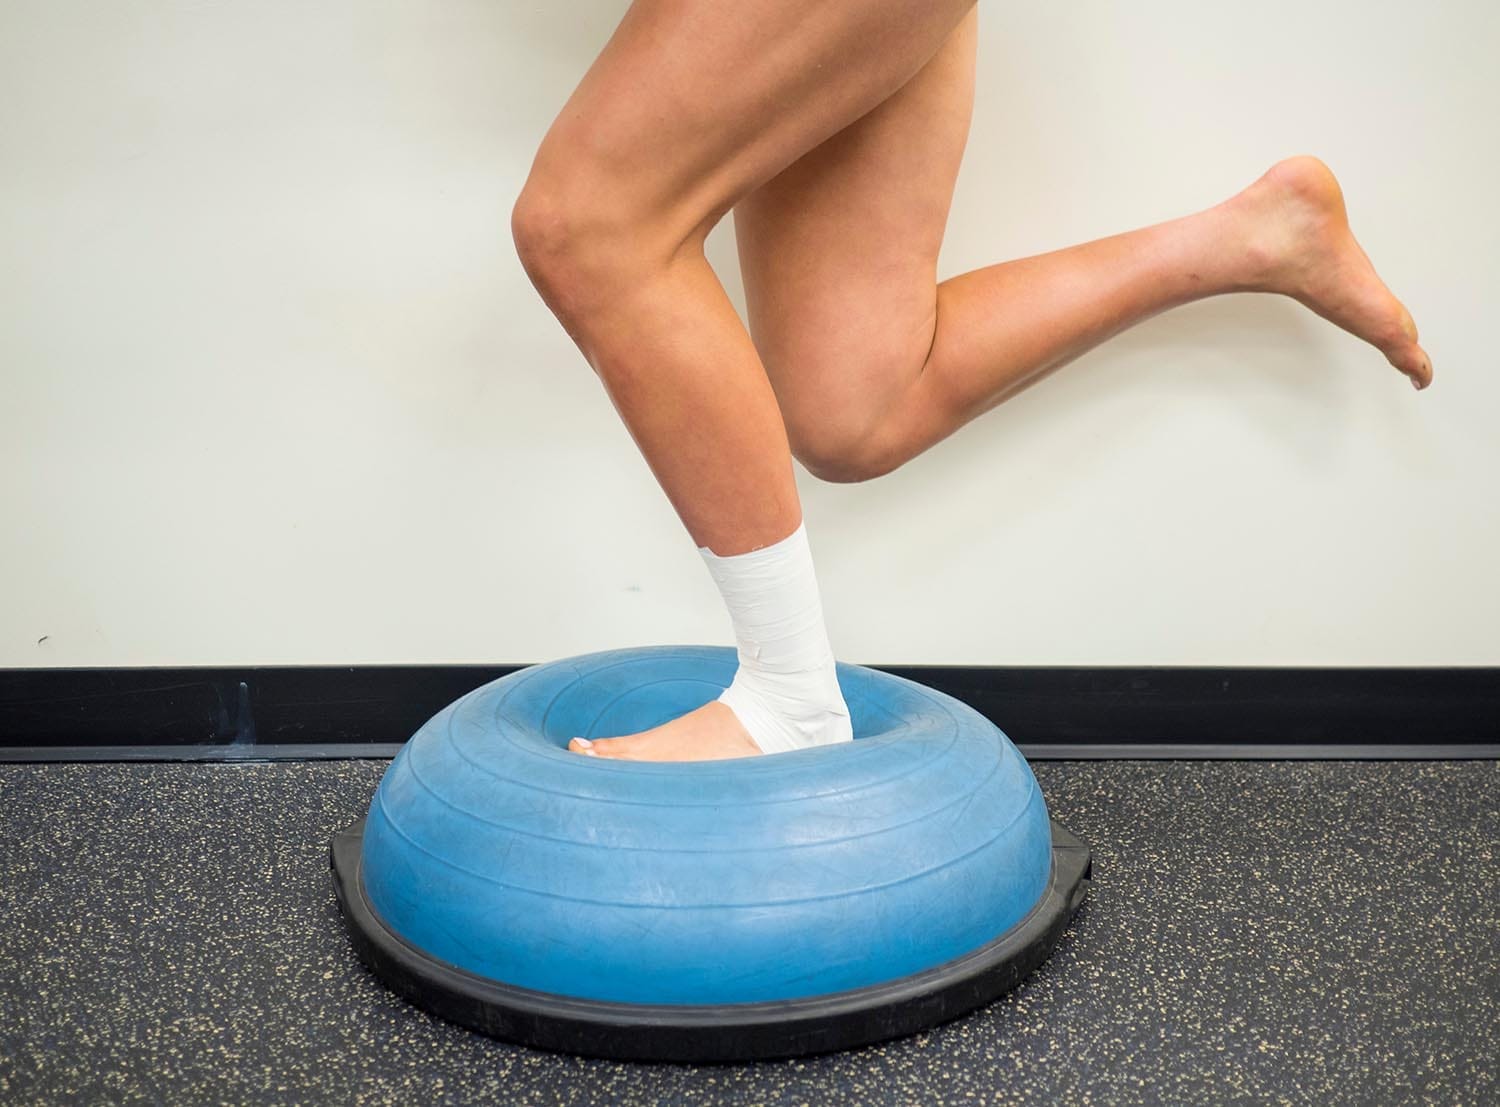 Athlete with a sprained ankle doing strengthening and balance exercises on a bosu ball